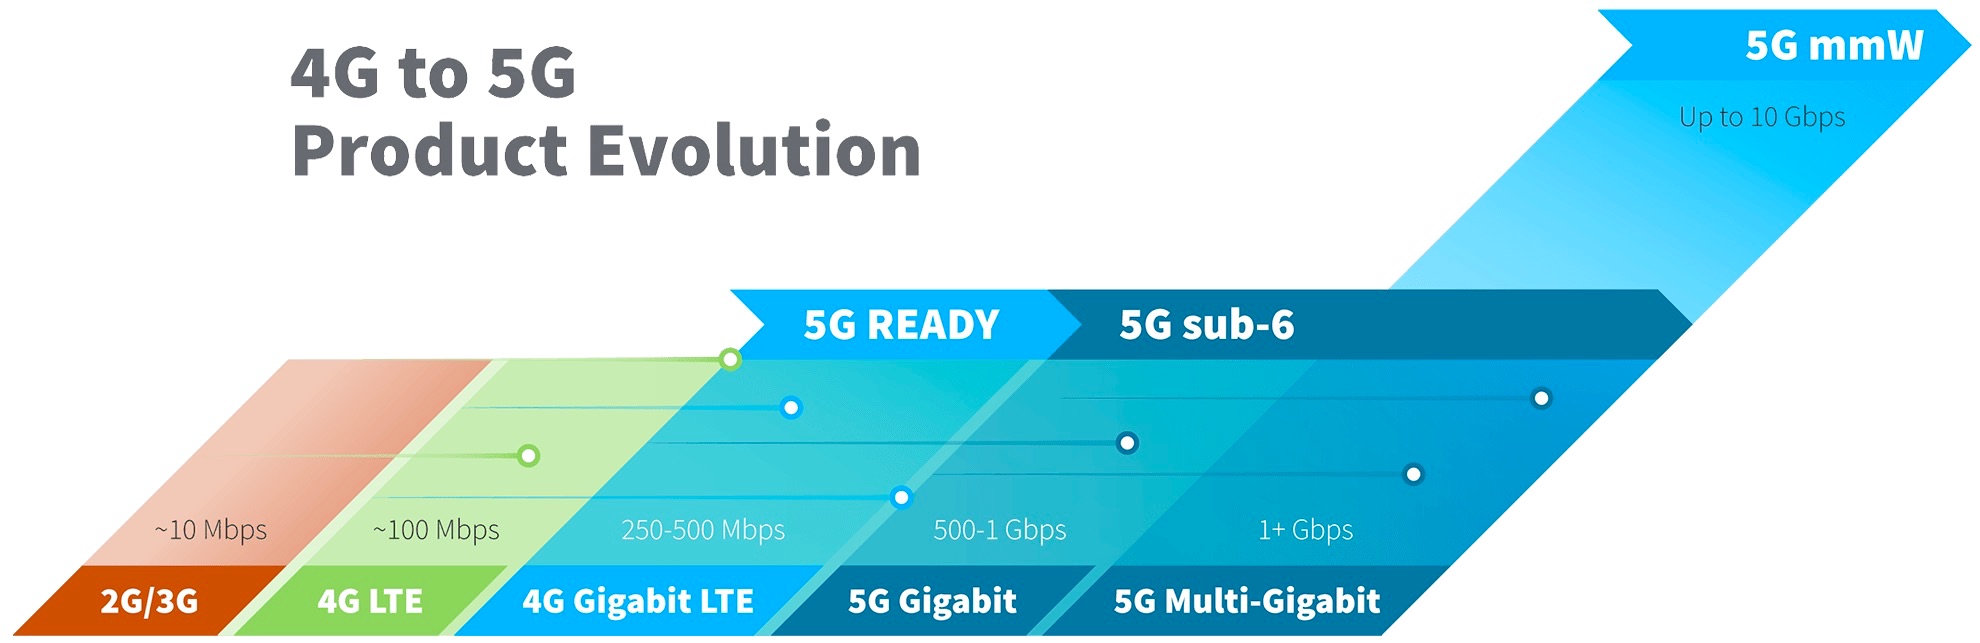 5G evolution of frequencies